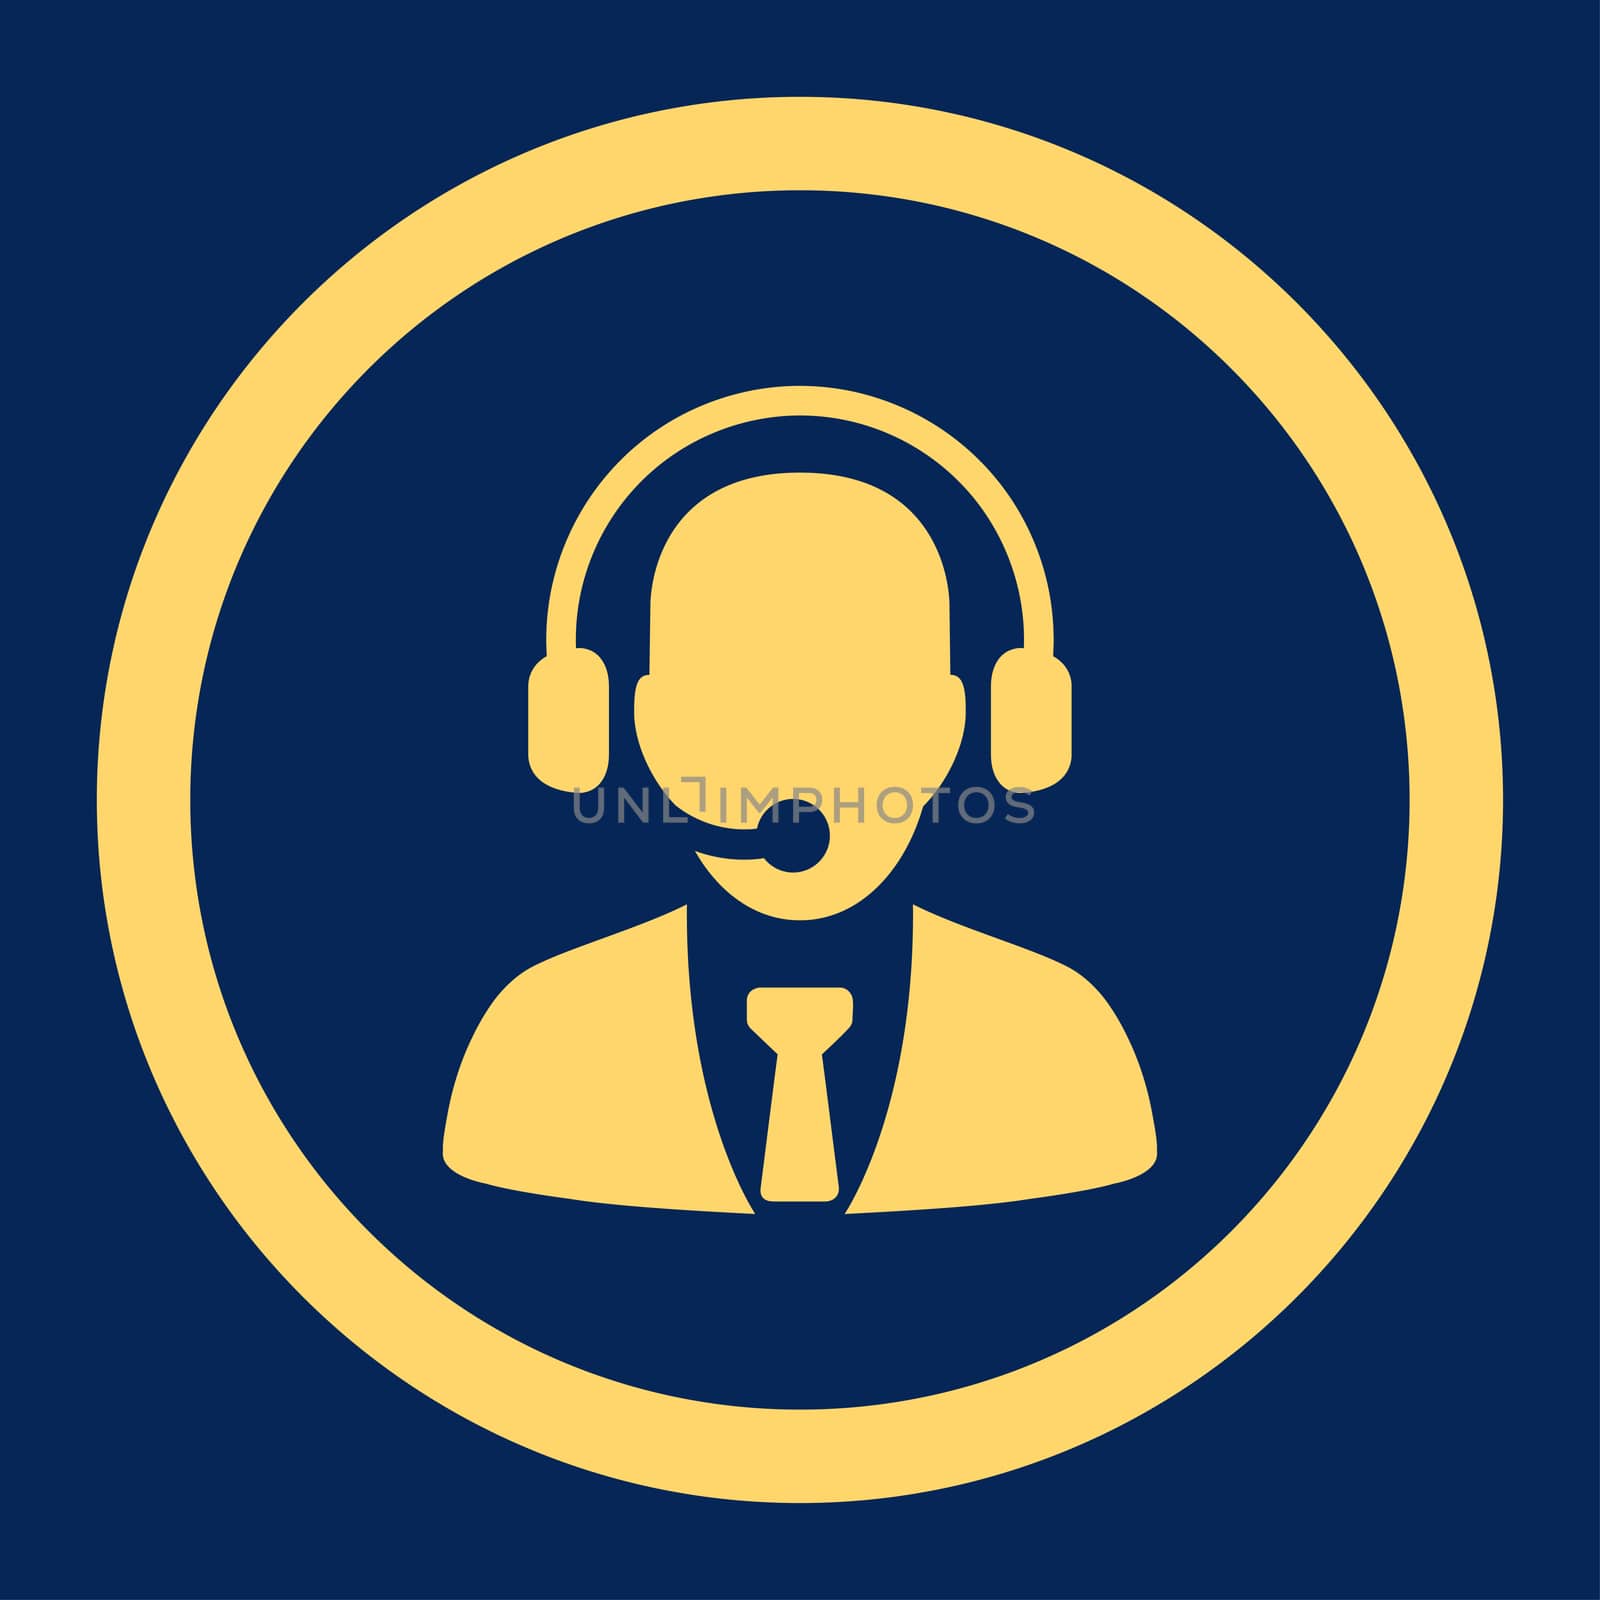 Call center glyph icon. This rounded flat symbol is drawn with yellow color on a blue background.